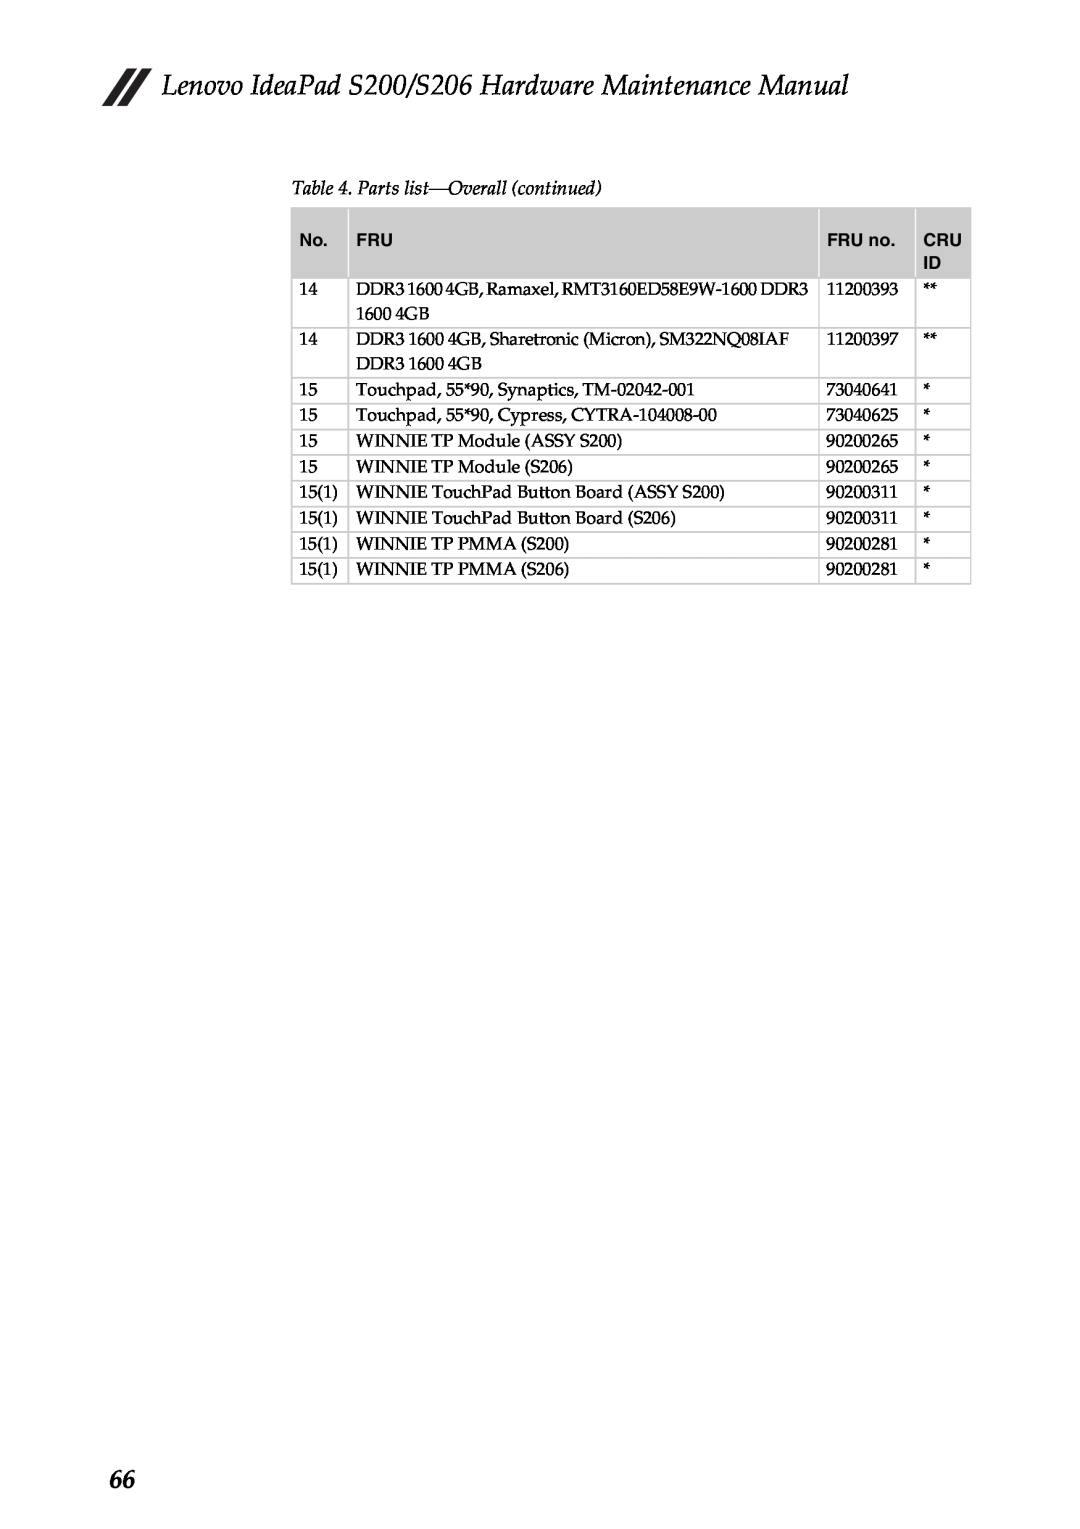 Lenovo S206, S200 manual Parts list-Overallcontinued, FRU no, DDR3 1600 4GB, Ramaxel, RMT3160ED58E9W-1600DDR3 